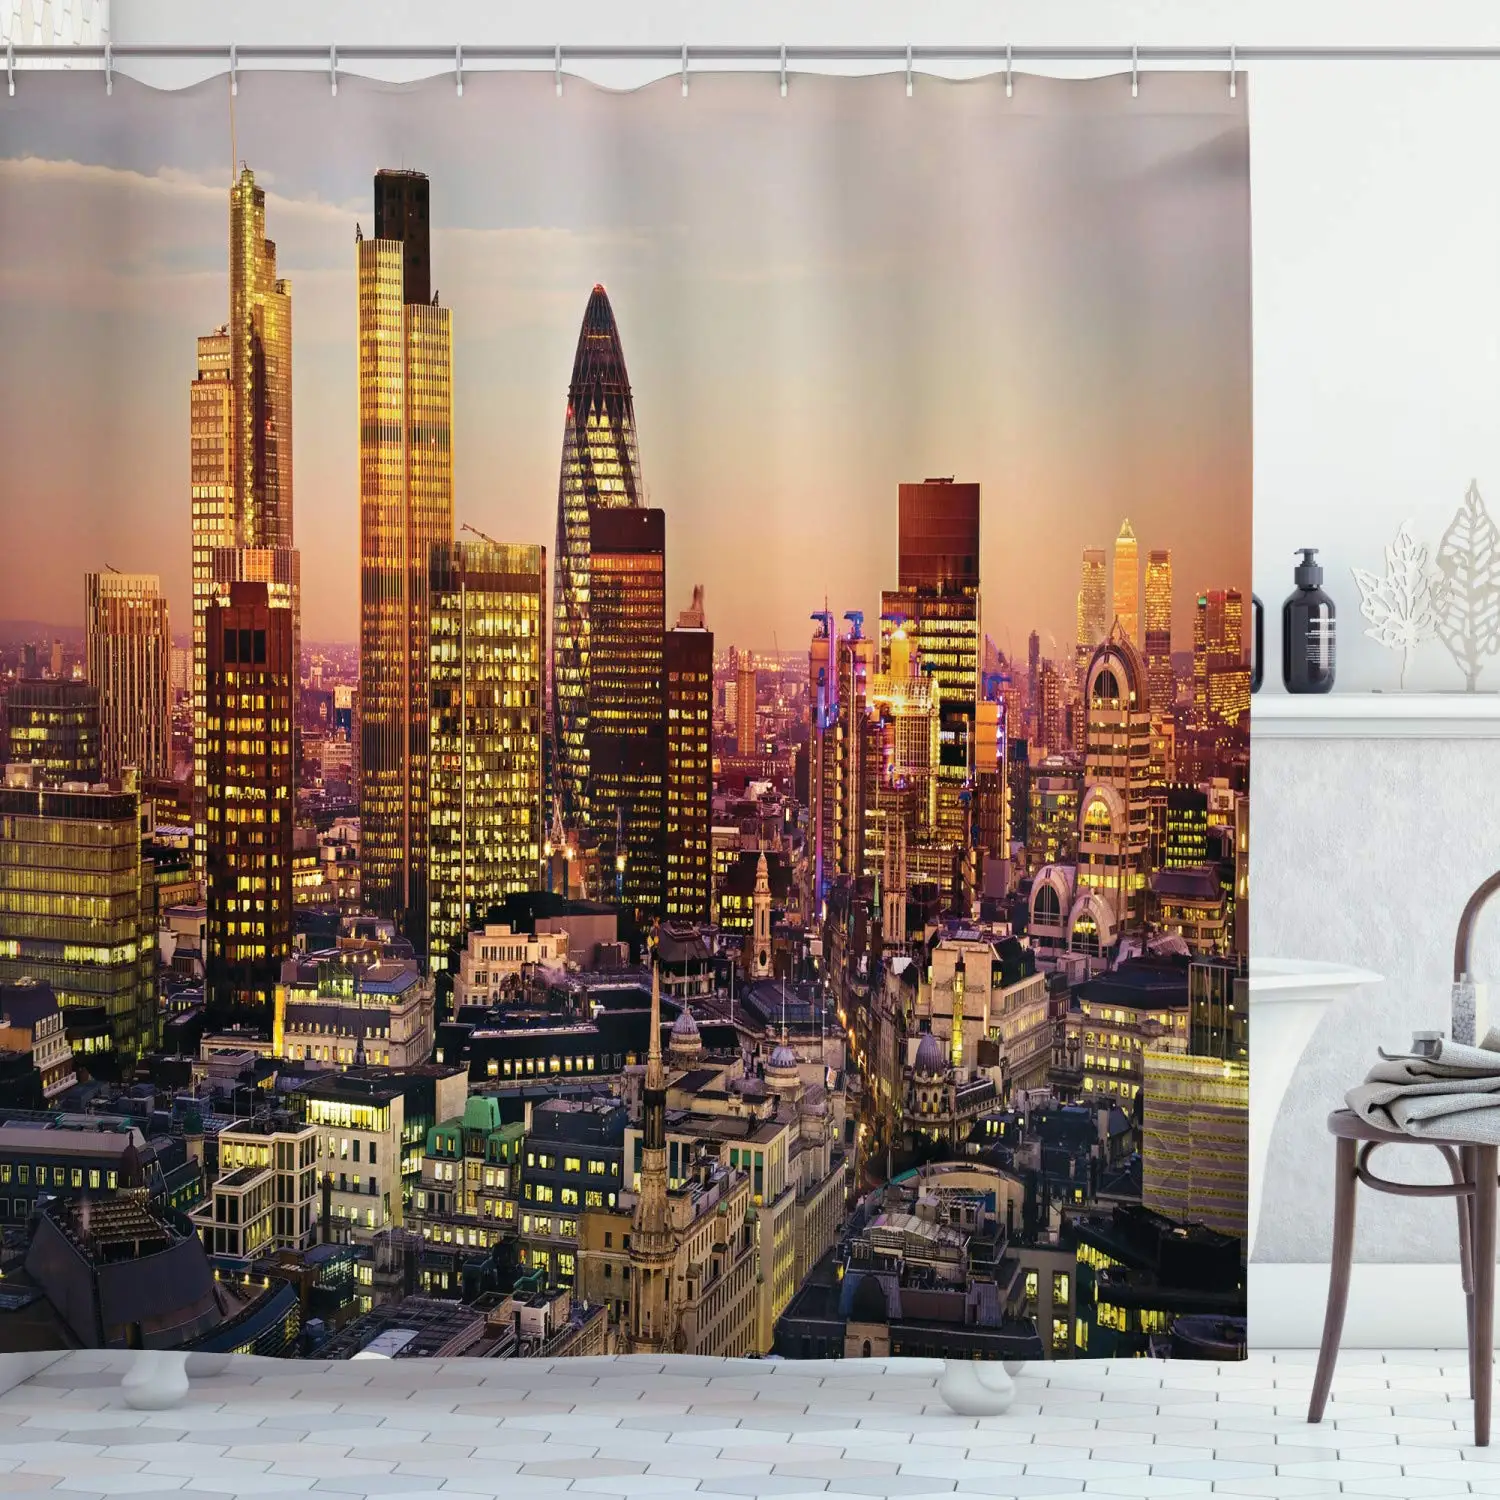 

New York Shower Curtain, Global City Sunset Reflecting on Skyscrapers Famous Town Landmark View Photo Print, Cloth Fabric